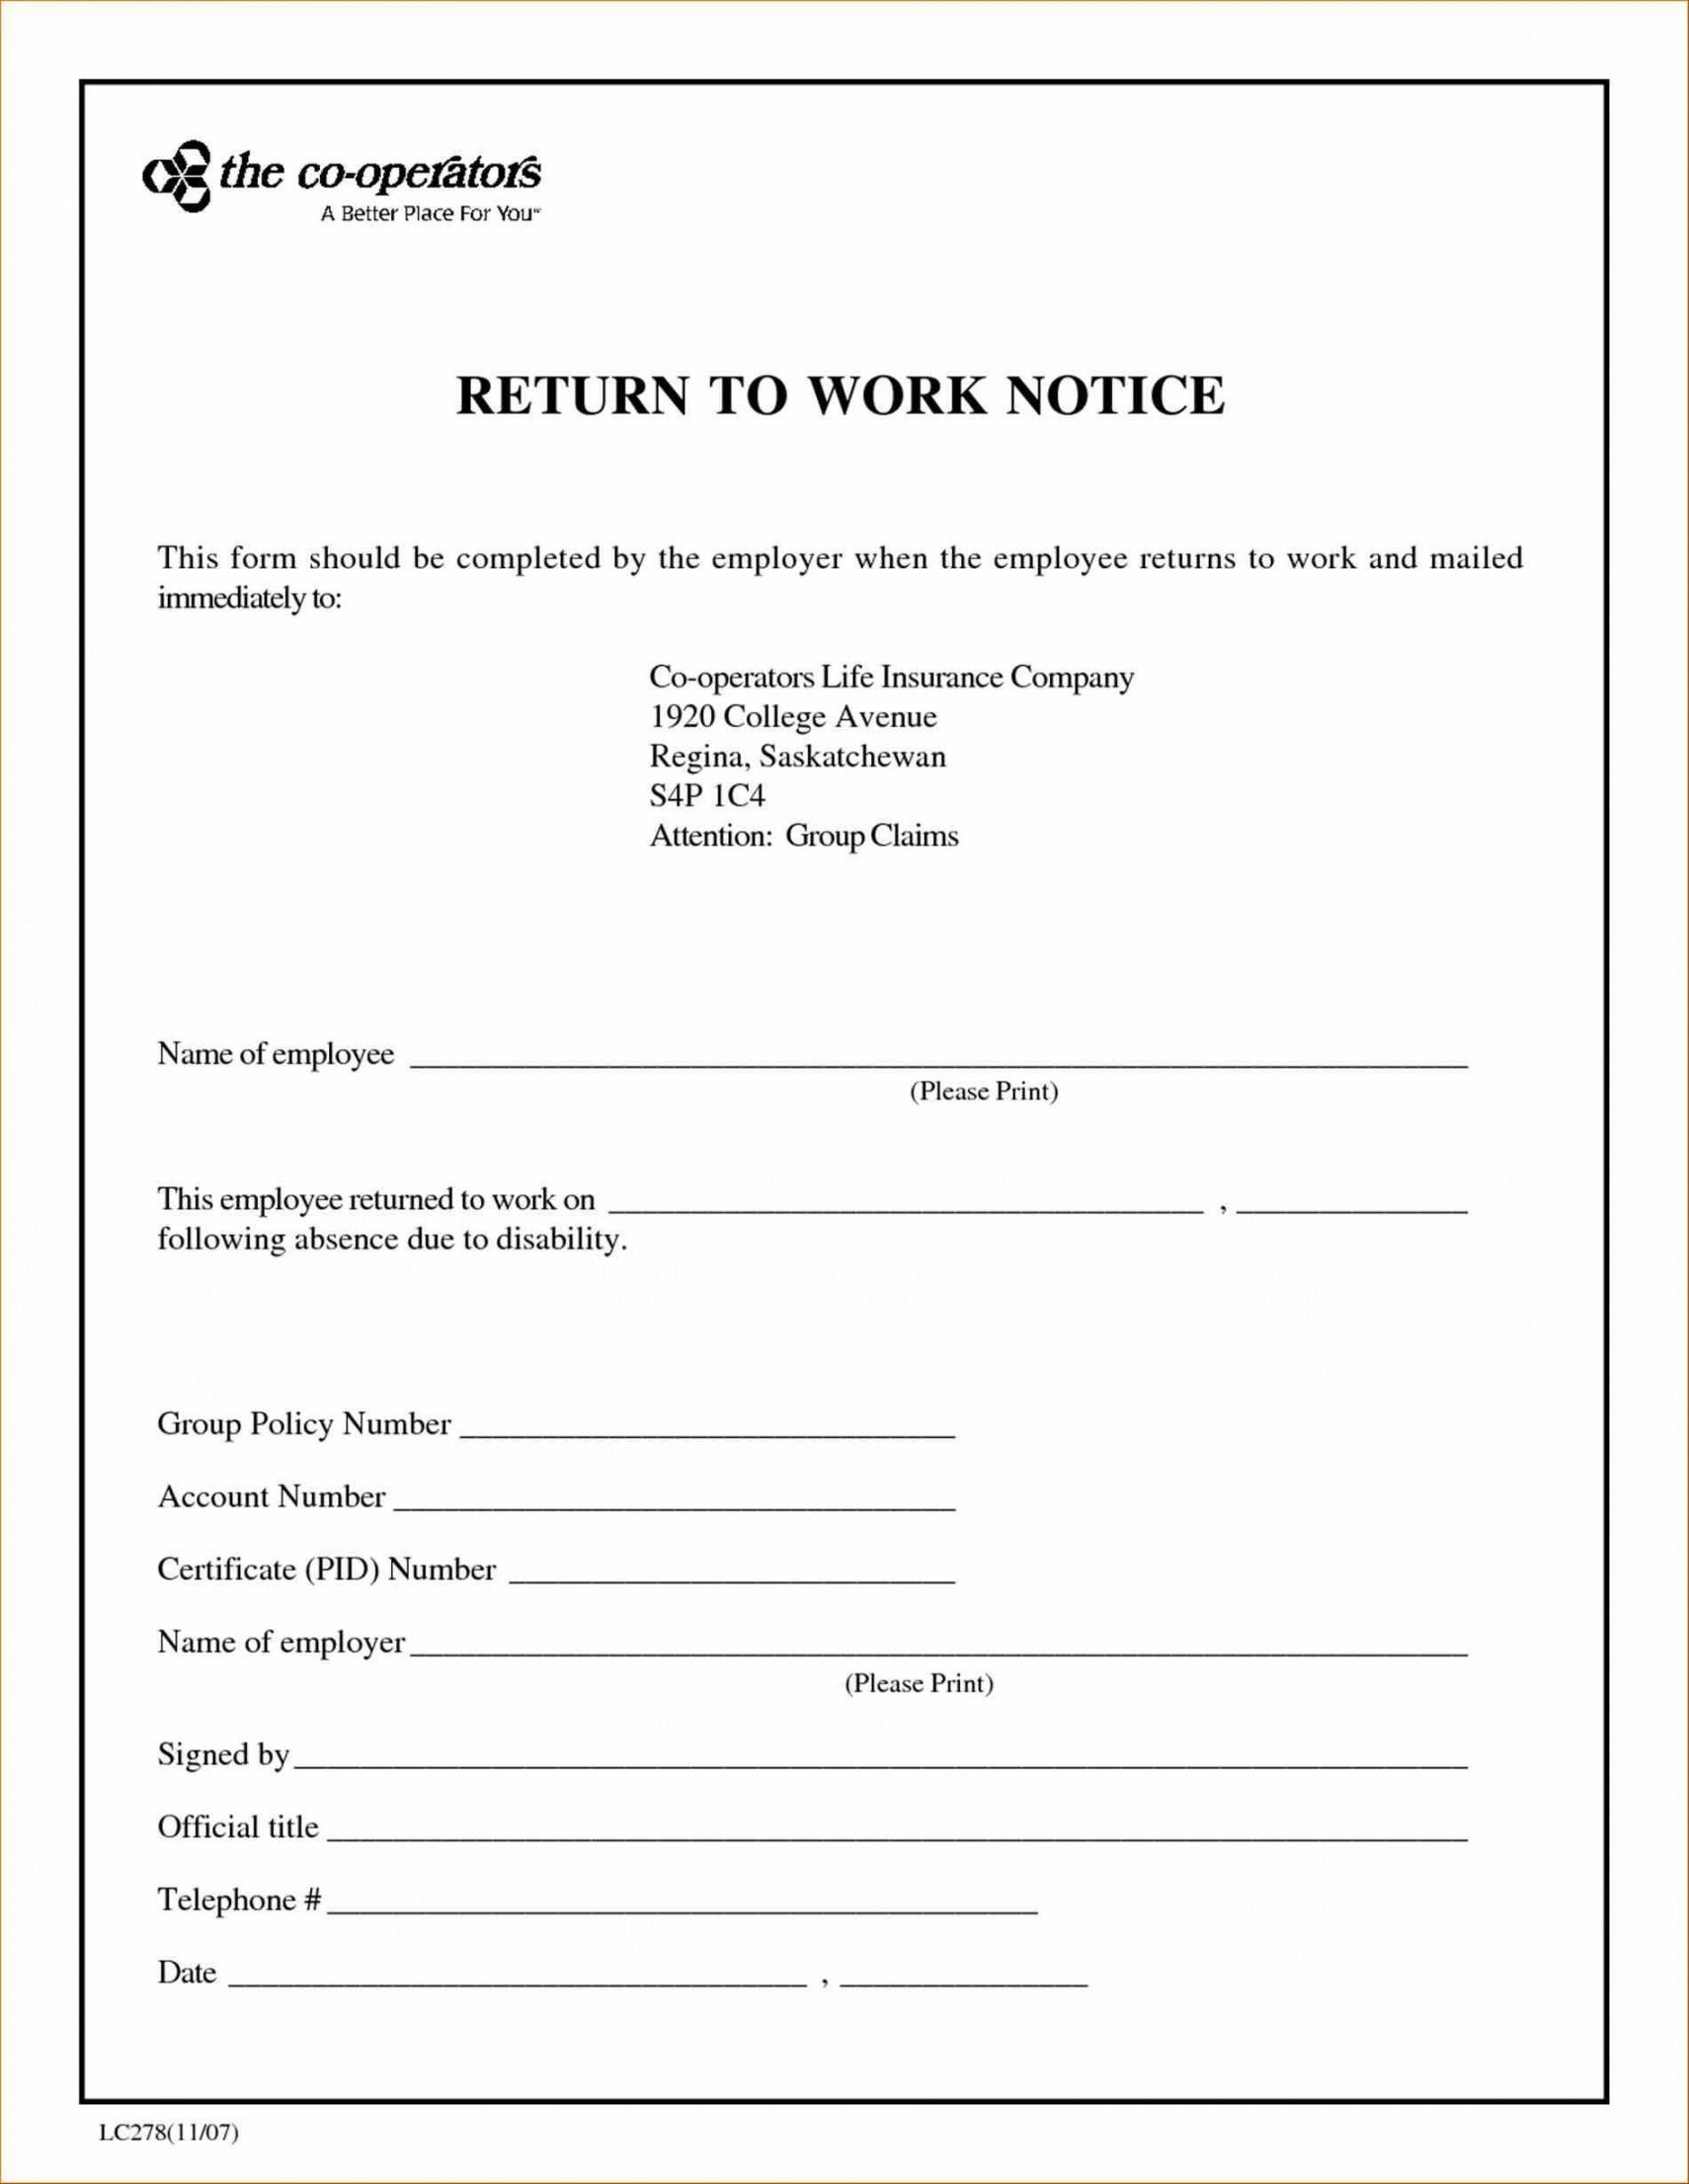 free s doctor notes templates note templates onlinestopwatchcom emergency room doctor note template word